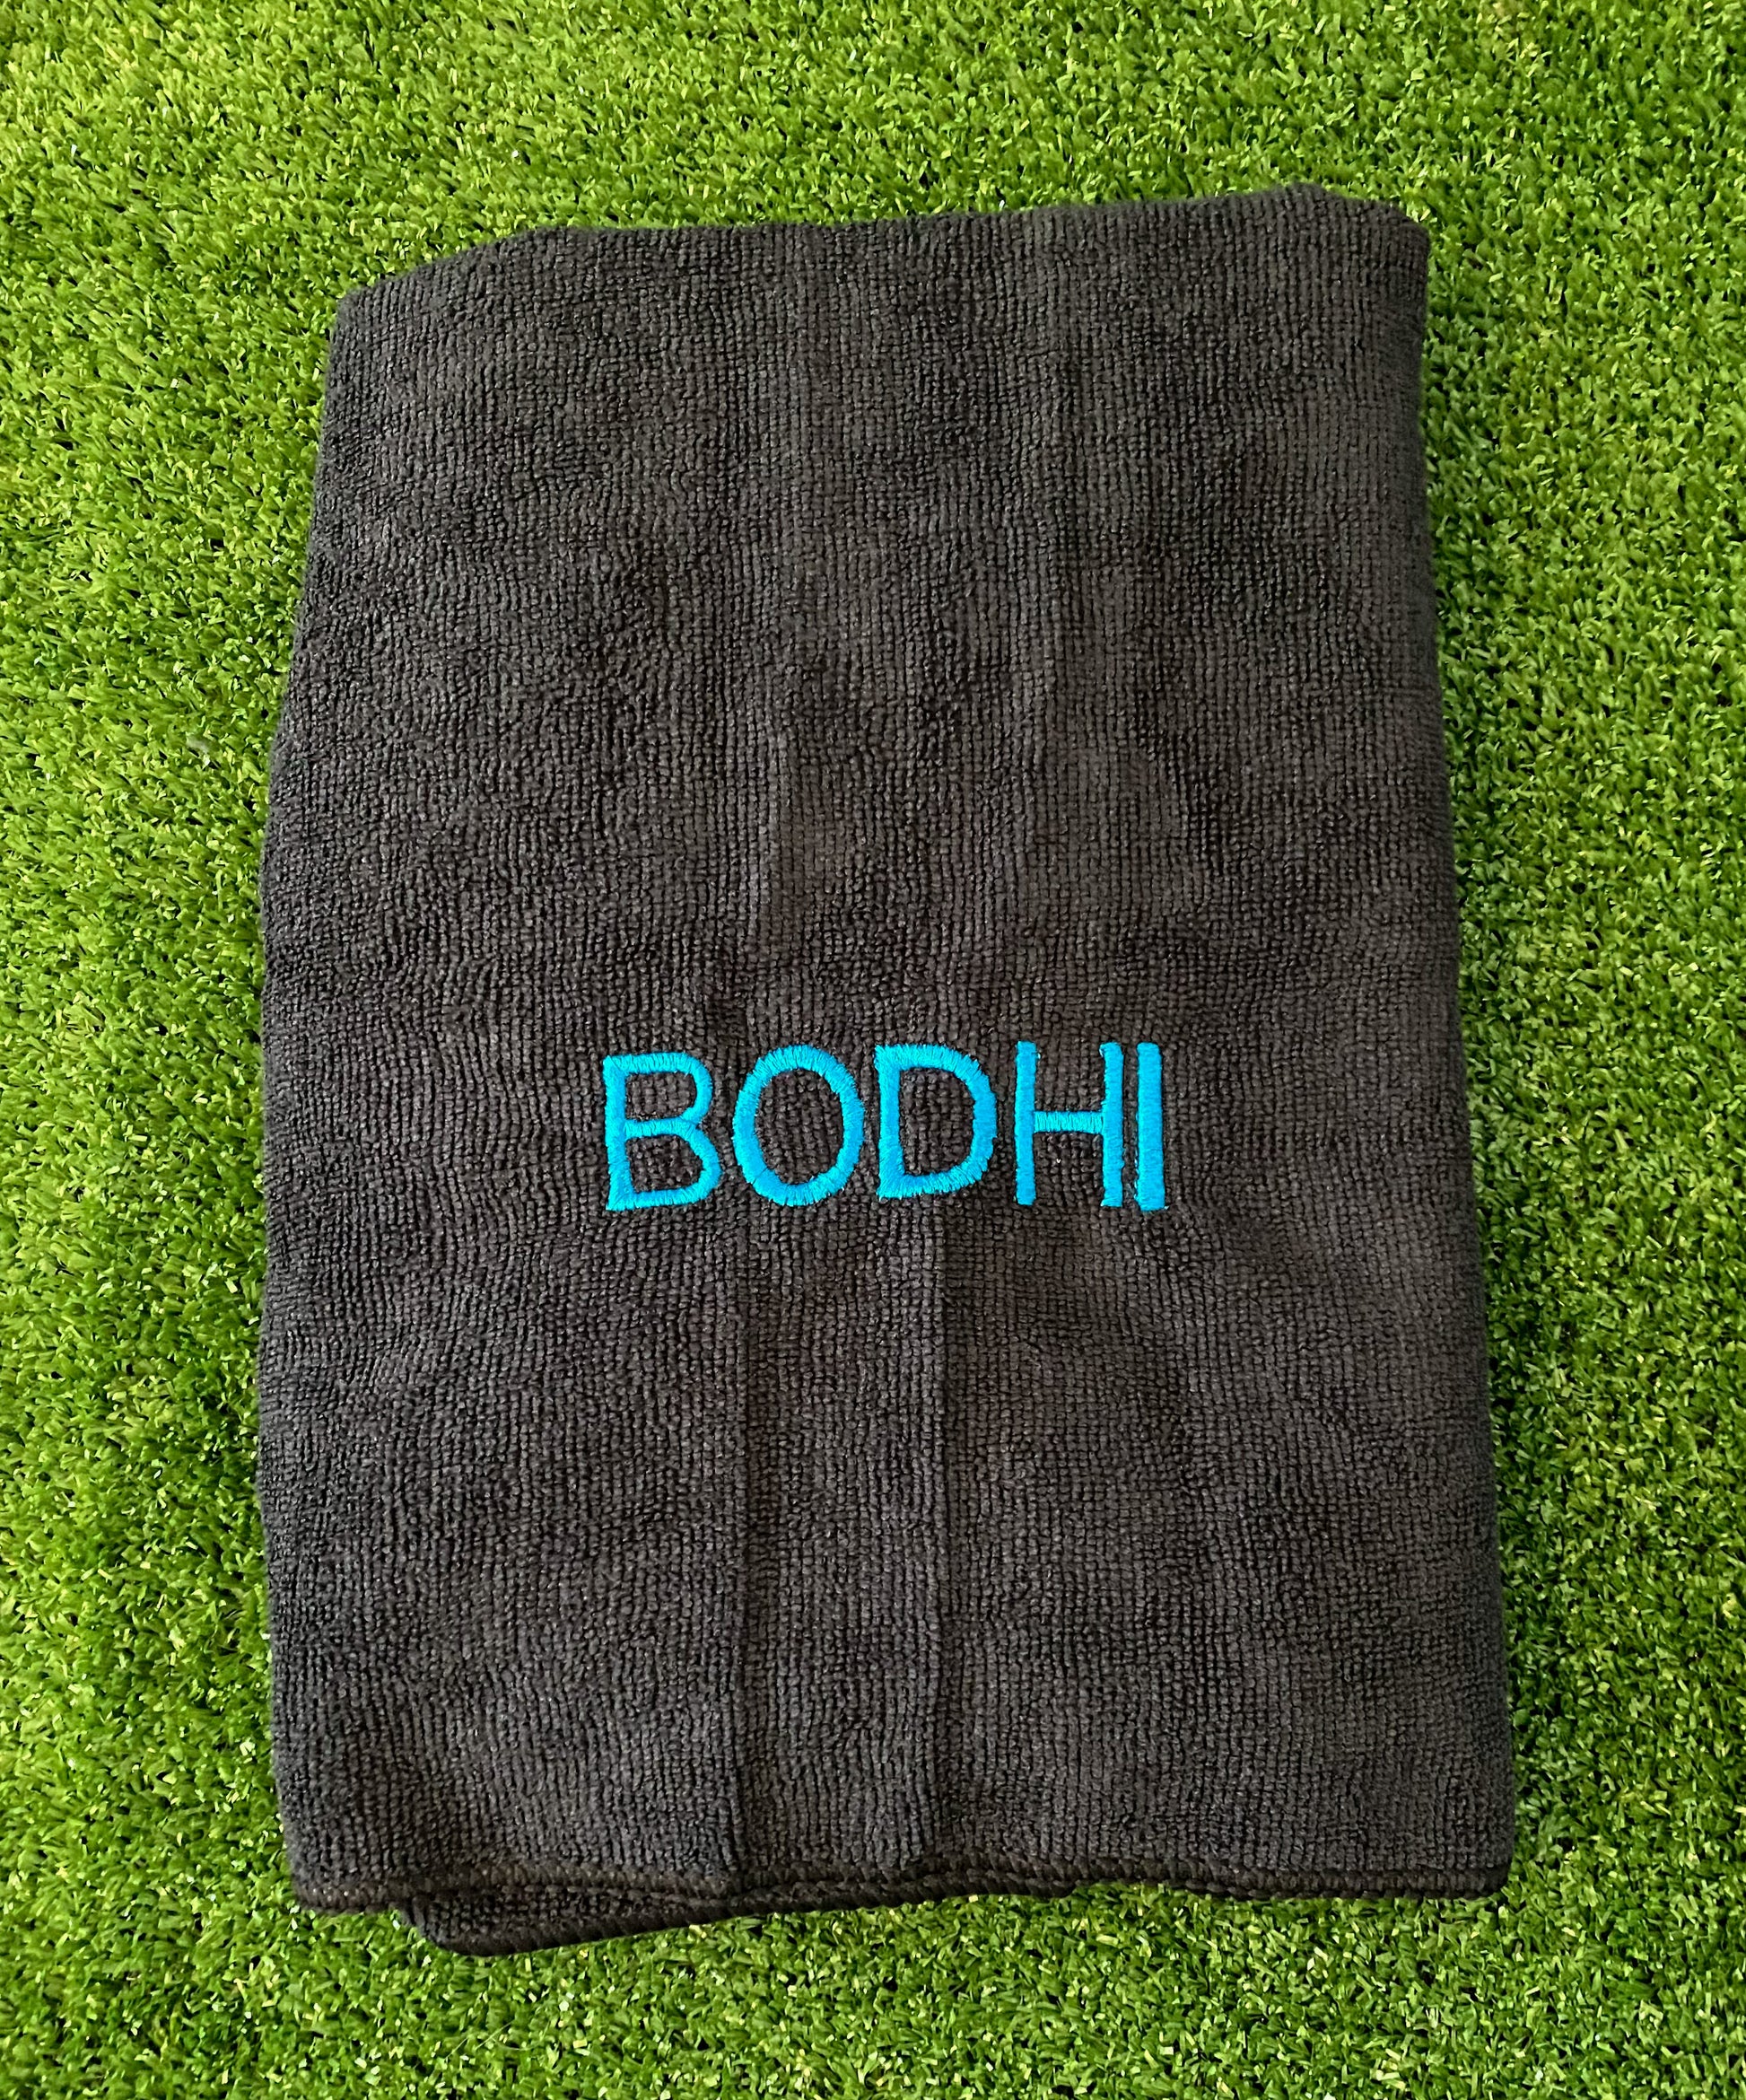 Personalized towels